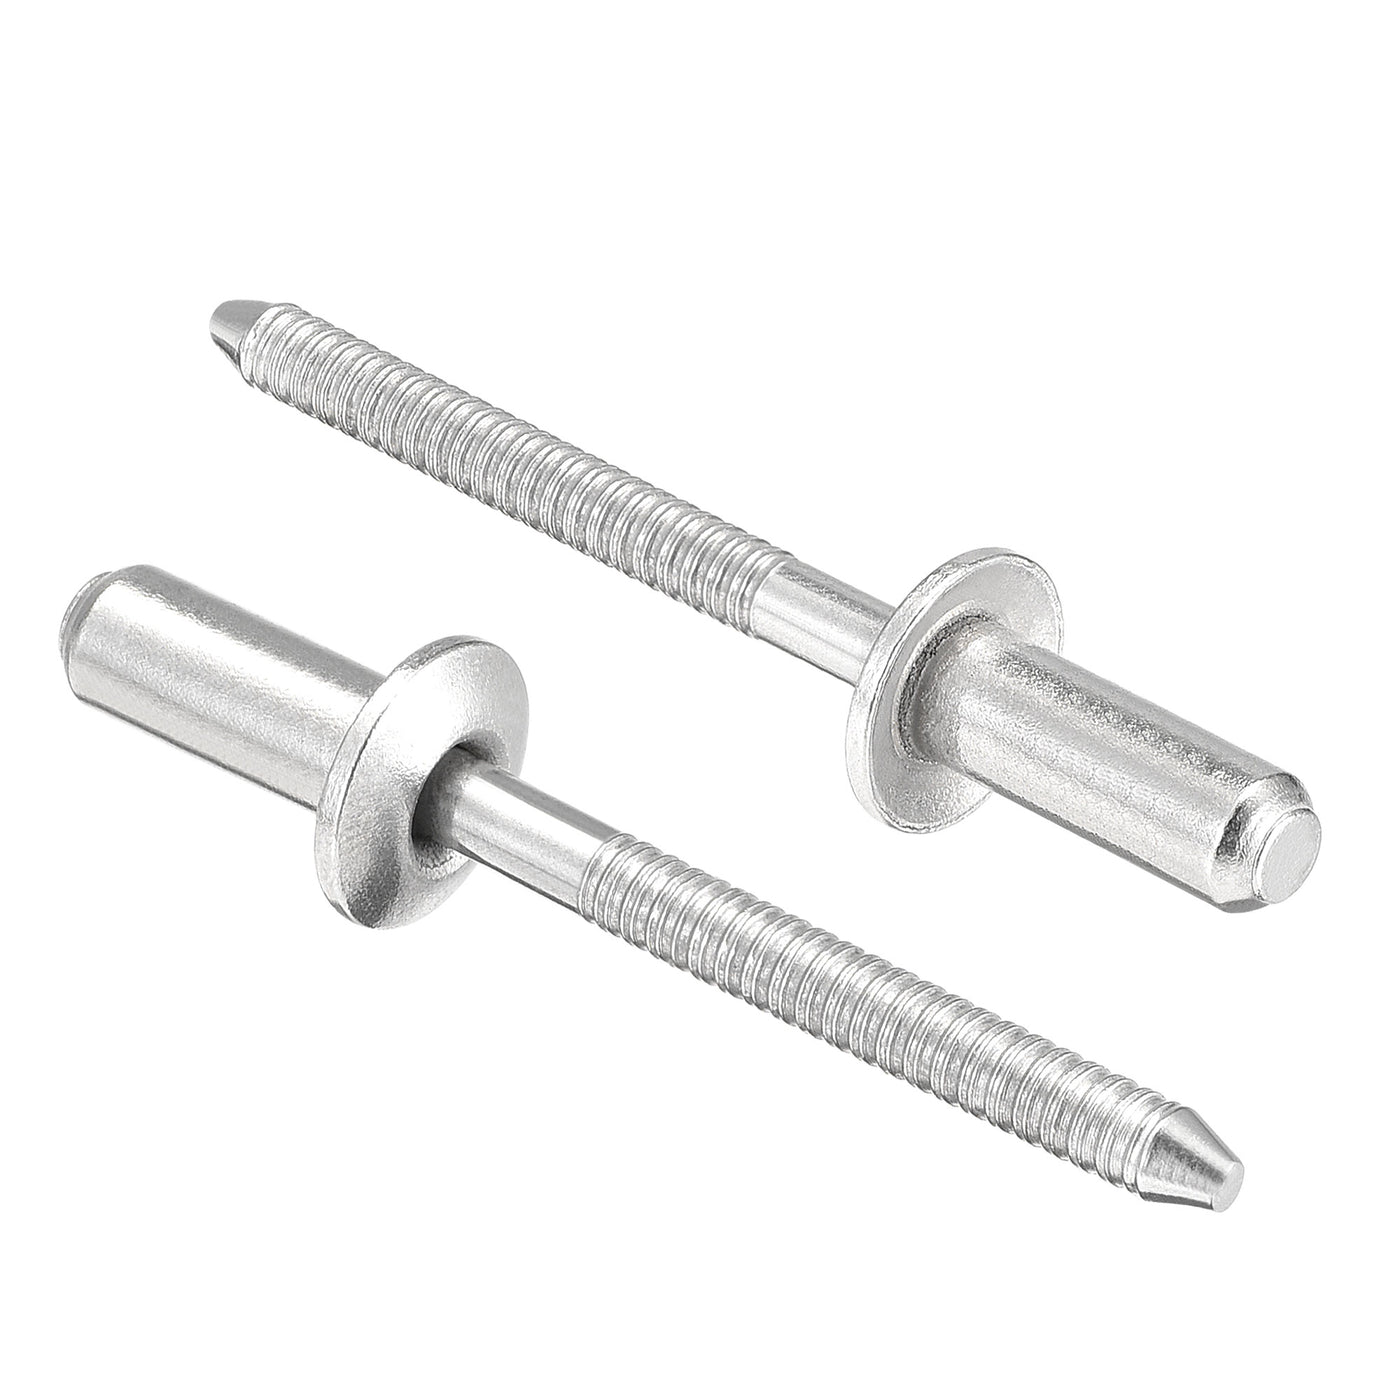 uxcell Uxcell Blind Rivets 304 Stainless Steel 4.8mm Diameter 13mm Grip Length 50pcs